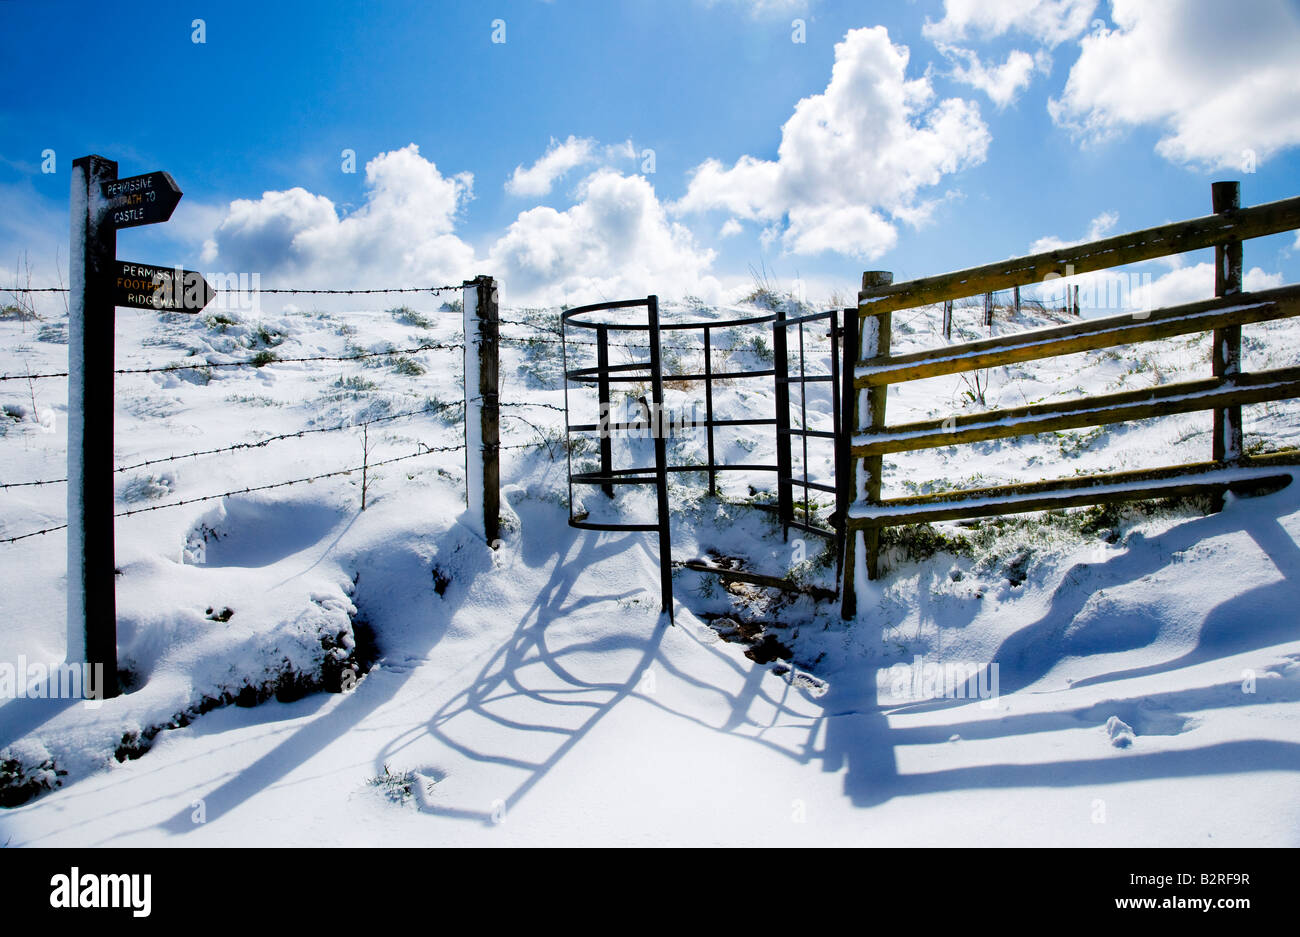 Shadows on newly fallen snow cast by a wrought iron kissing gate and fence with a signpost. Stock Photo